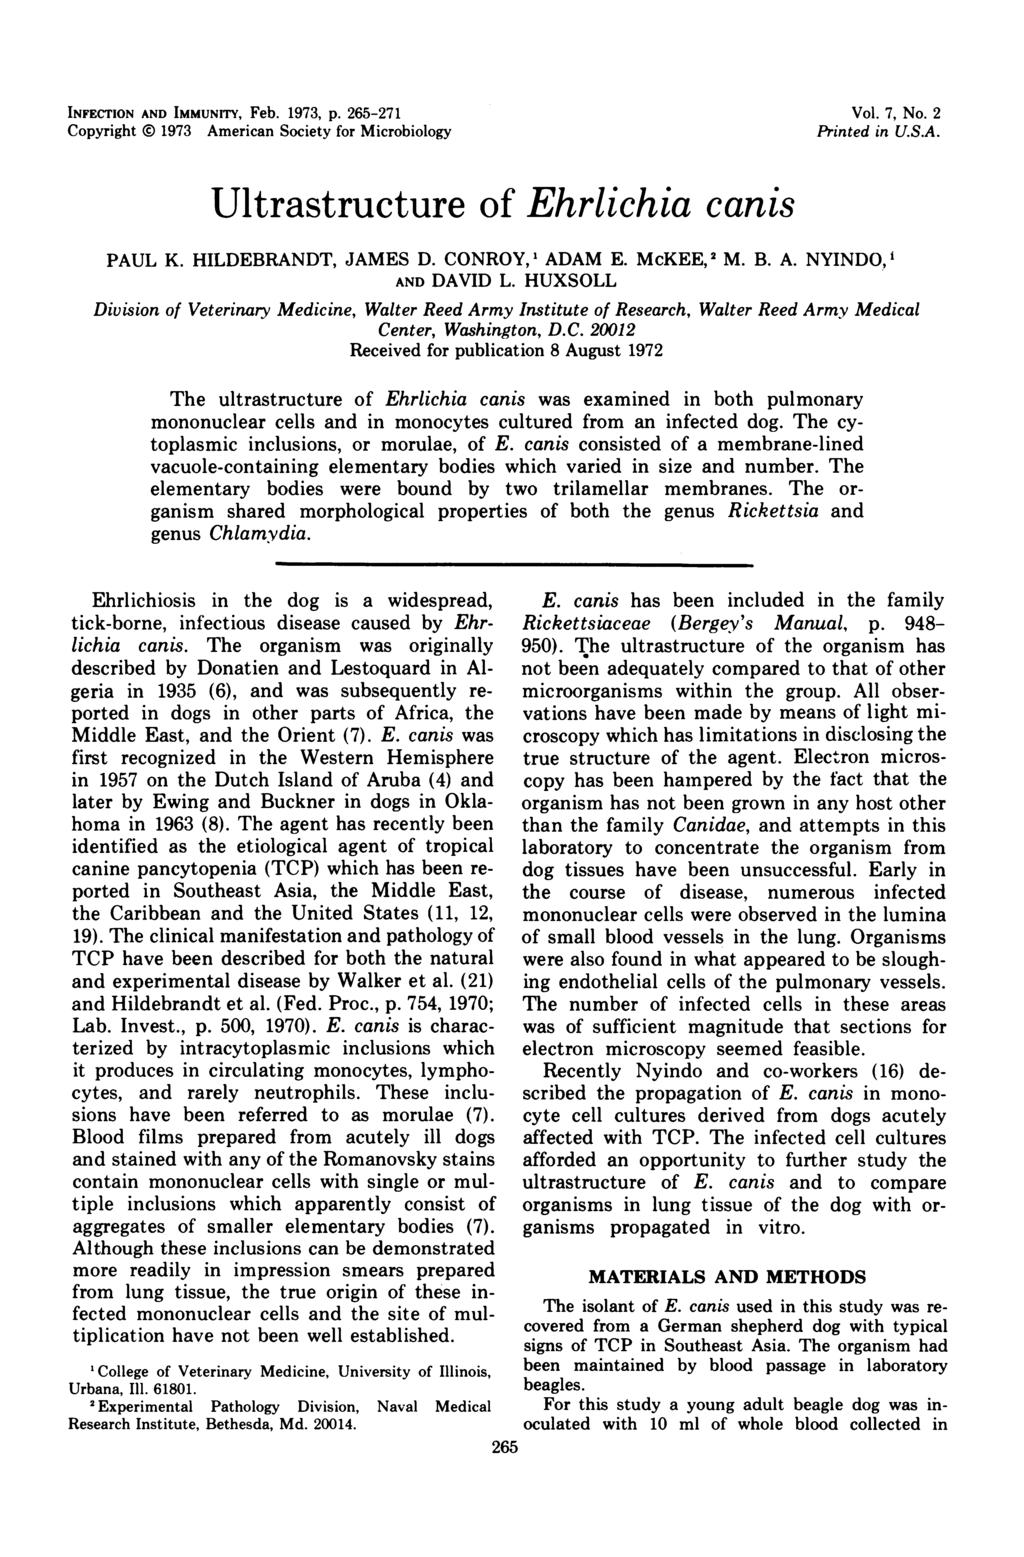 INFECTION AND IMMUNrrY, Feb. 1973, p. 265-271 Copyright 1973 American Society for Microbiology Ultrastructure of Ehrlichia canis Vol. 7, No. 2 Printed in U.S.A. PAUL K. HILDEBRANDT, JAMES D.